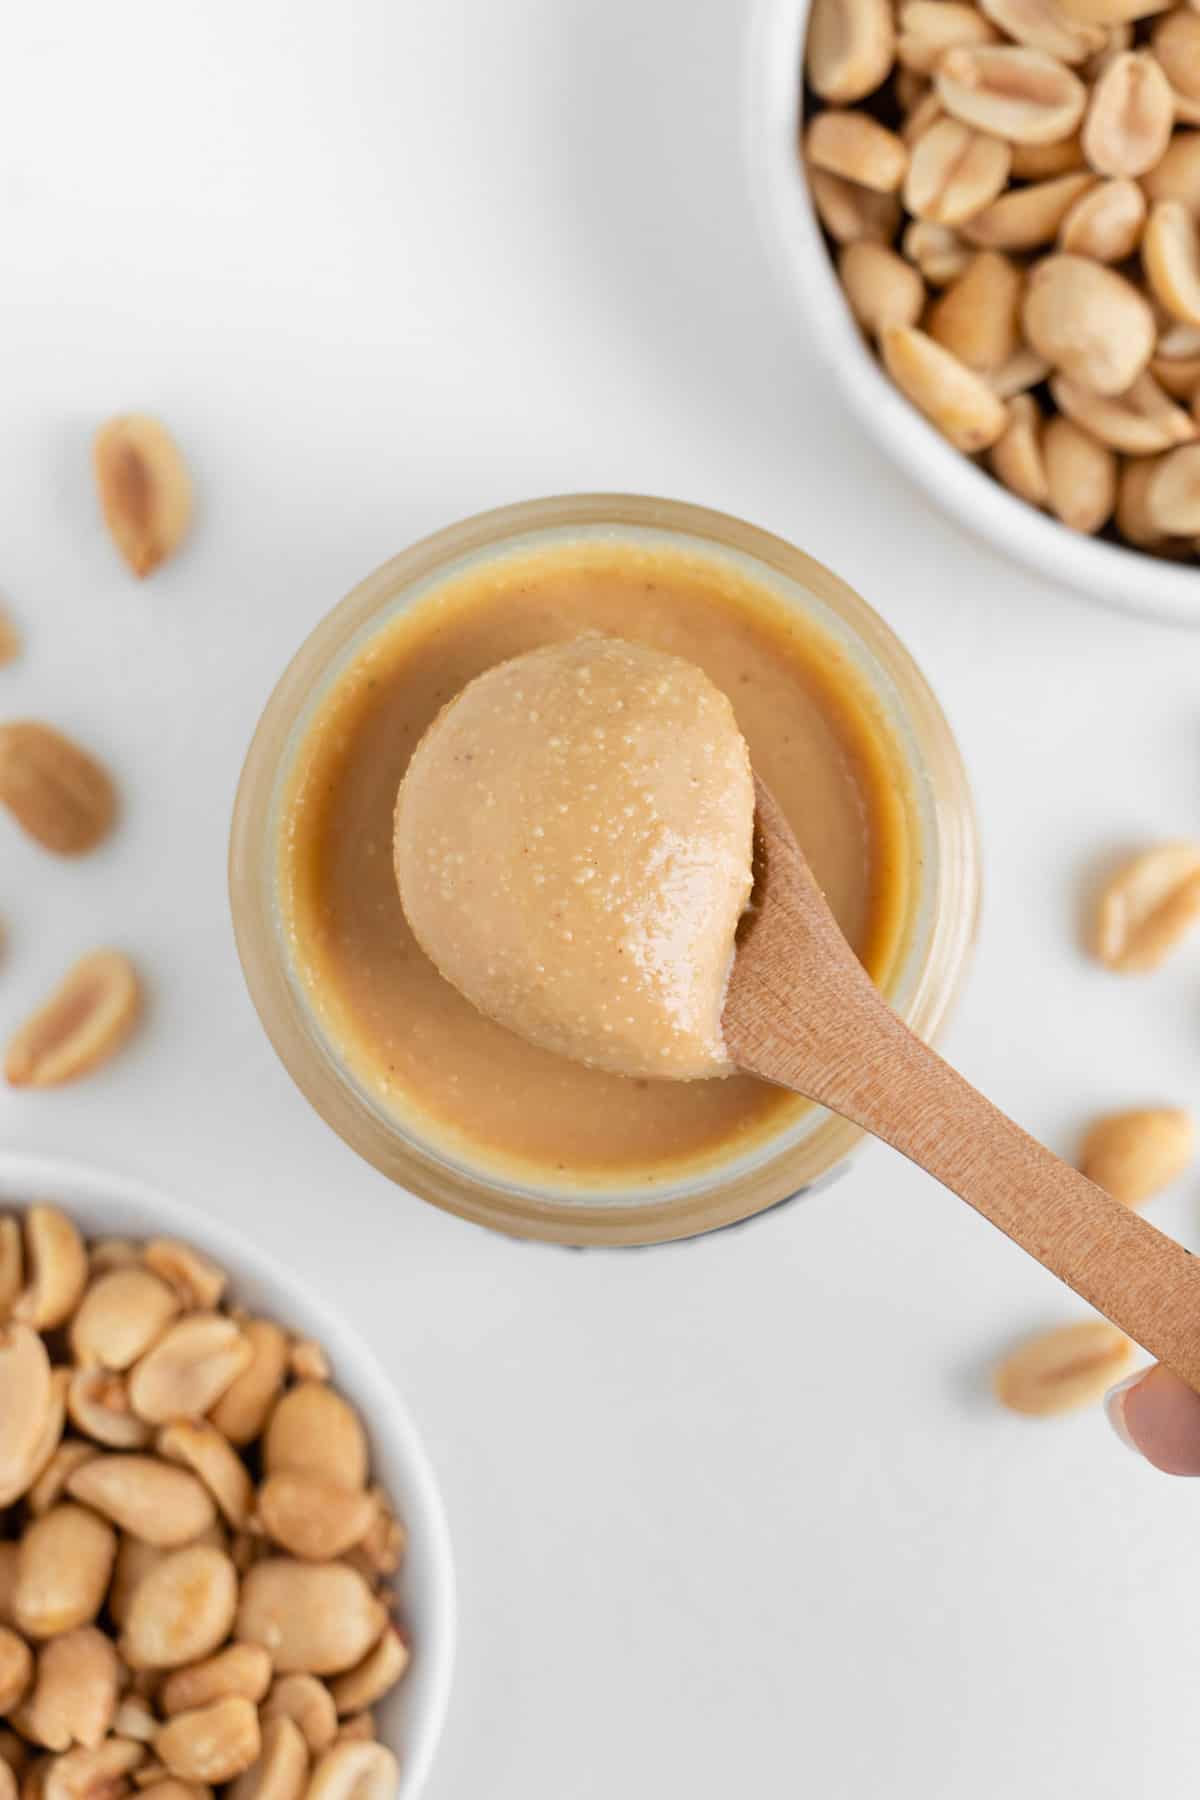 a wooden spoon scooping into a glass jar of nut butter